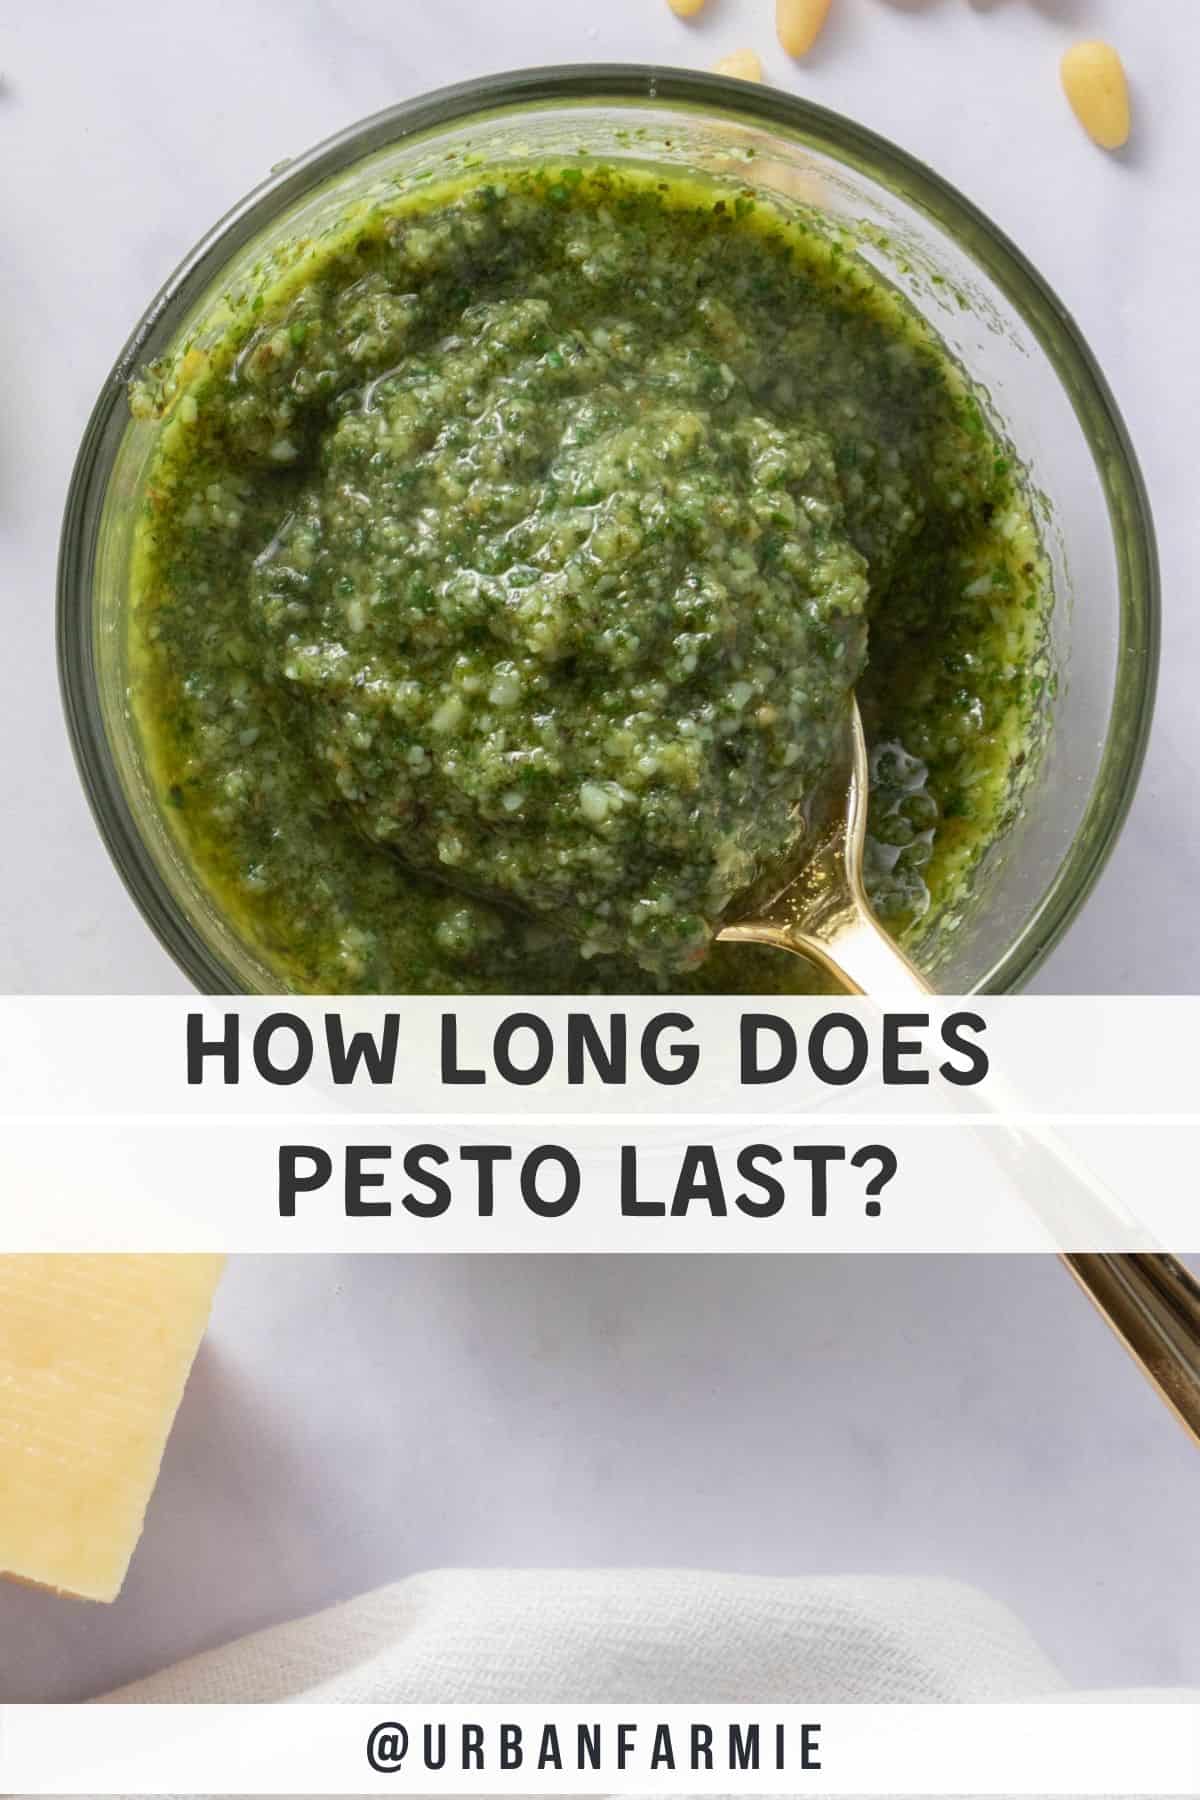 Close up image of pesto with text overlay of post title on top.